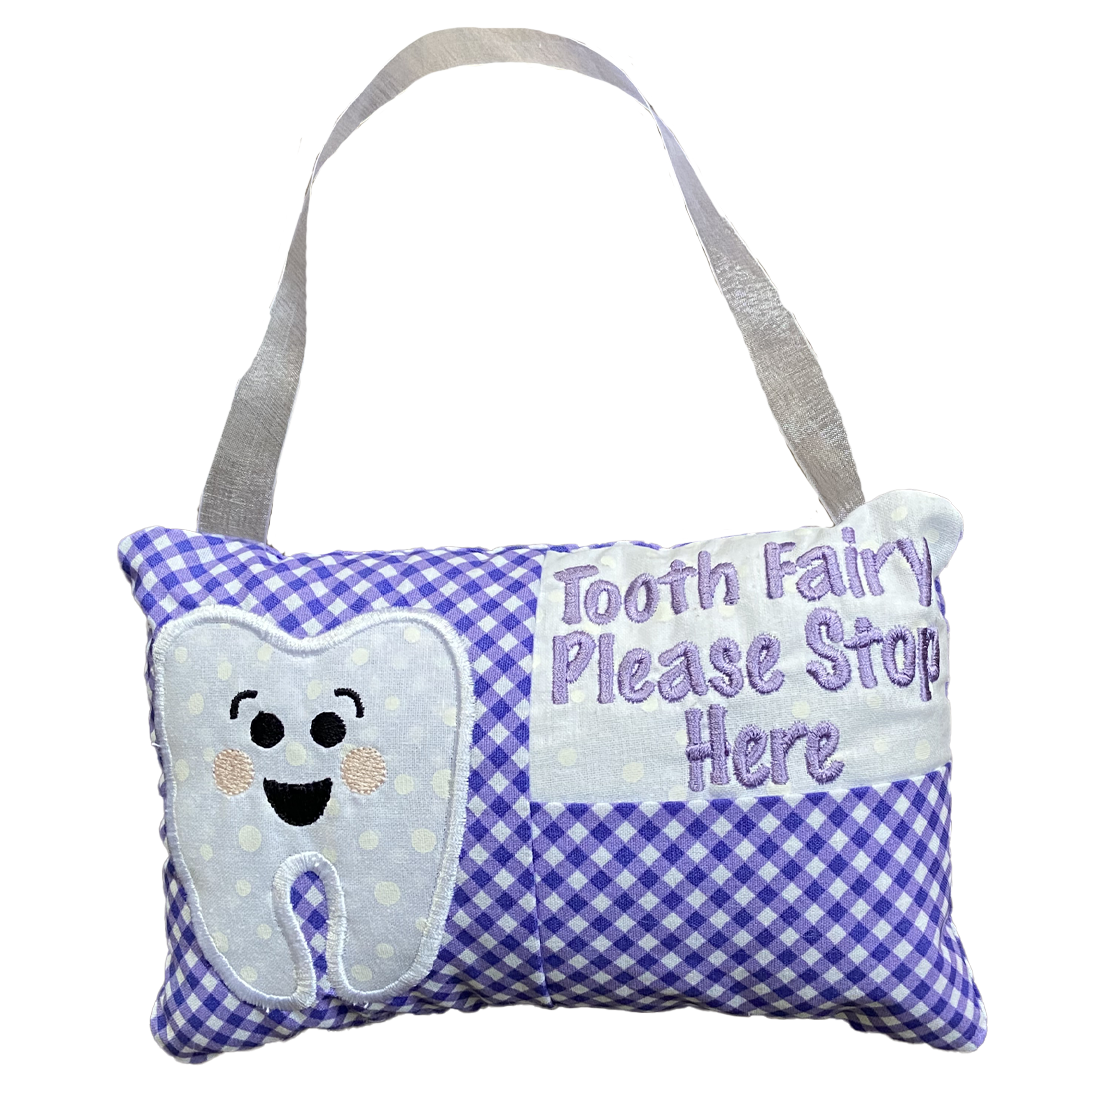 Child's Tooth Fairy Hanging Pillow Cushion Purple Gingham